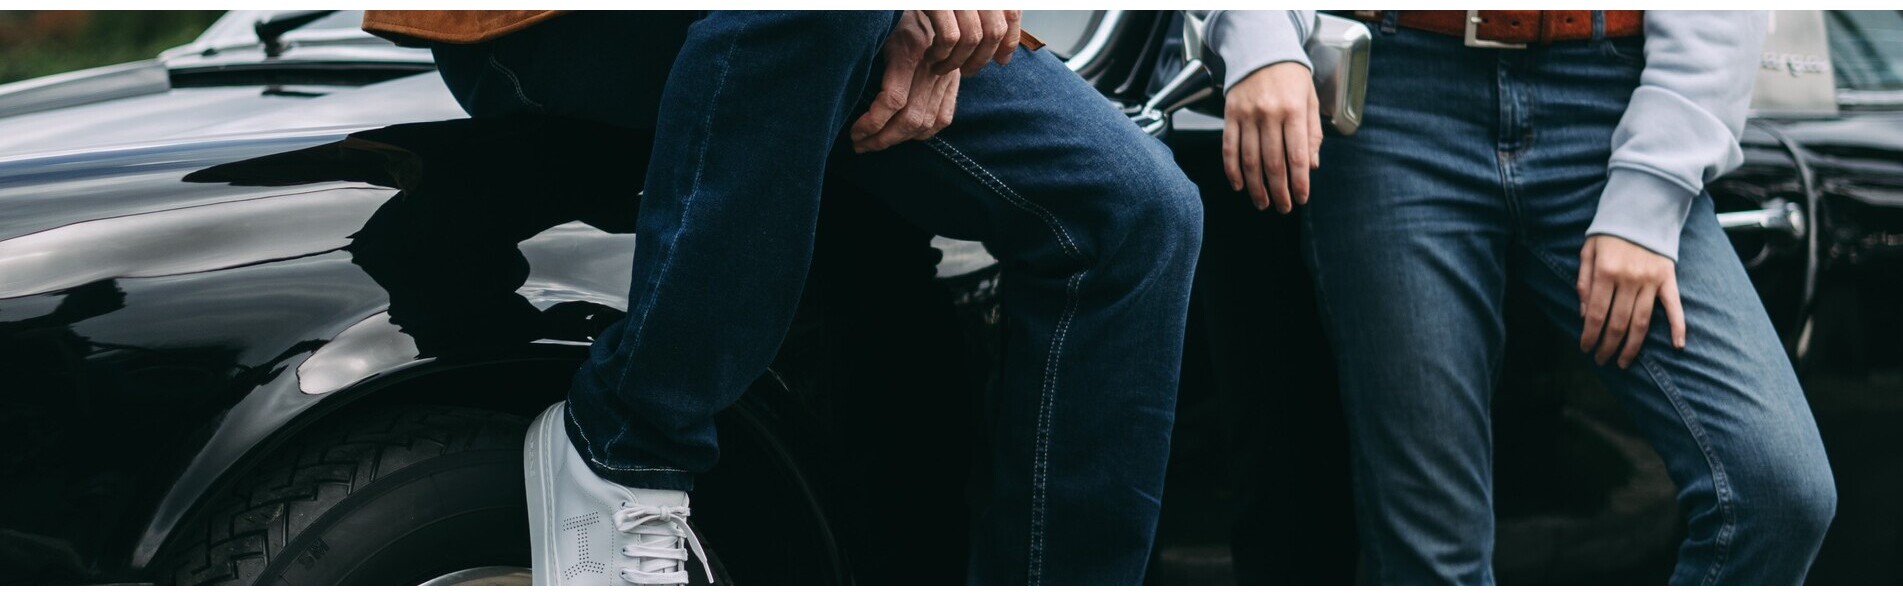 https://www.kronopolo.es/image/cache/catalog/Jeans%20Selvedge/what%20are%20selvedge%20jeans-1903x596.jpg